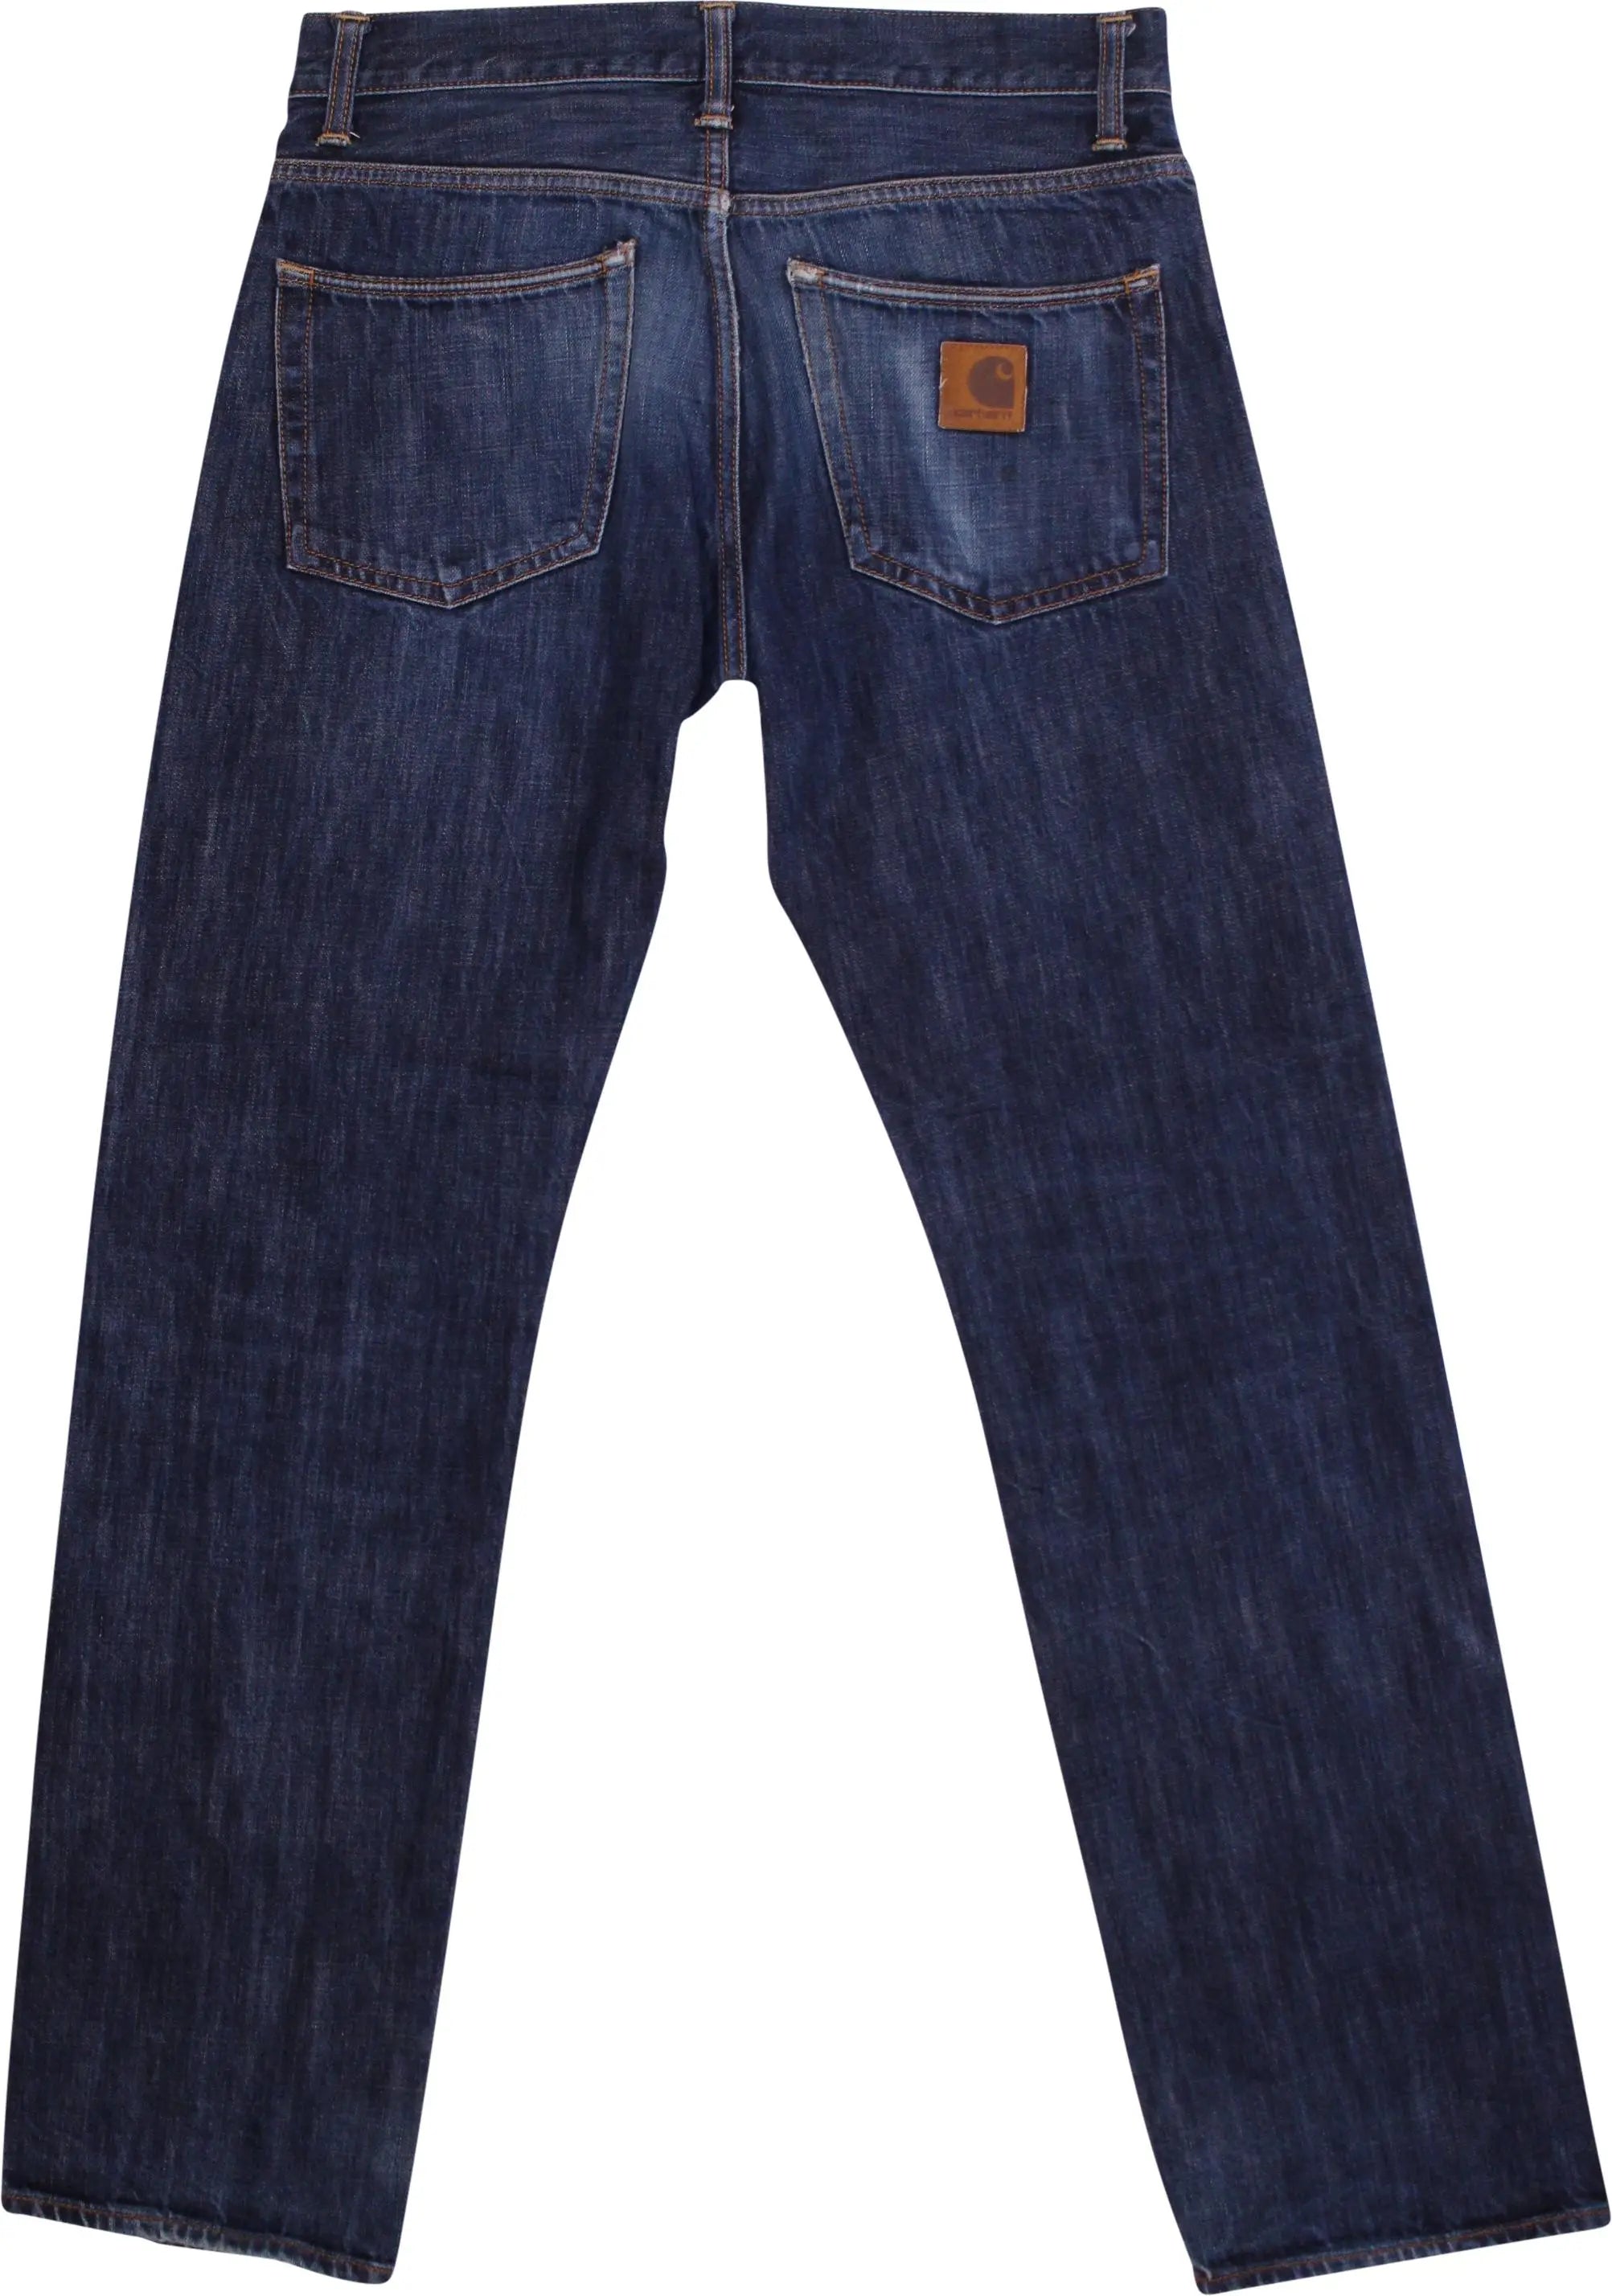 Carhartt - Blue Regular Fit Jeans by Carhartt- ThriftTale.com - Vintage and second handclothing